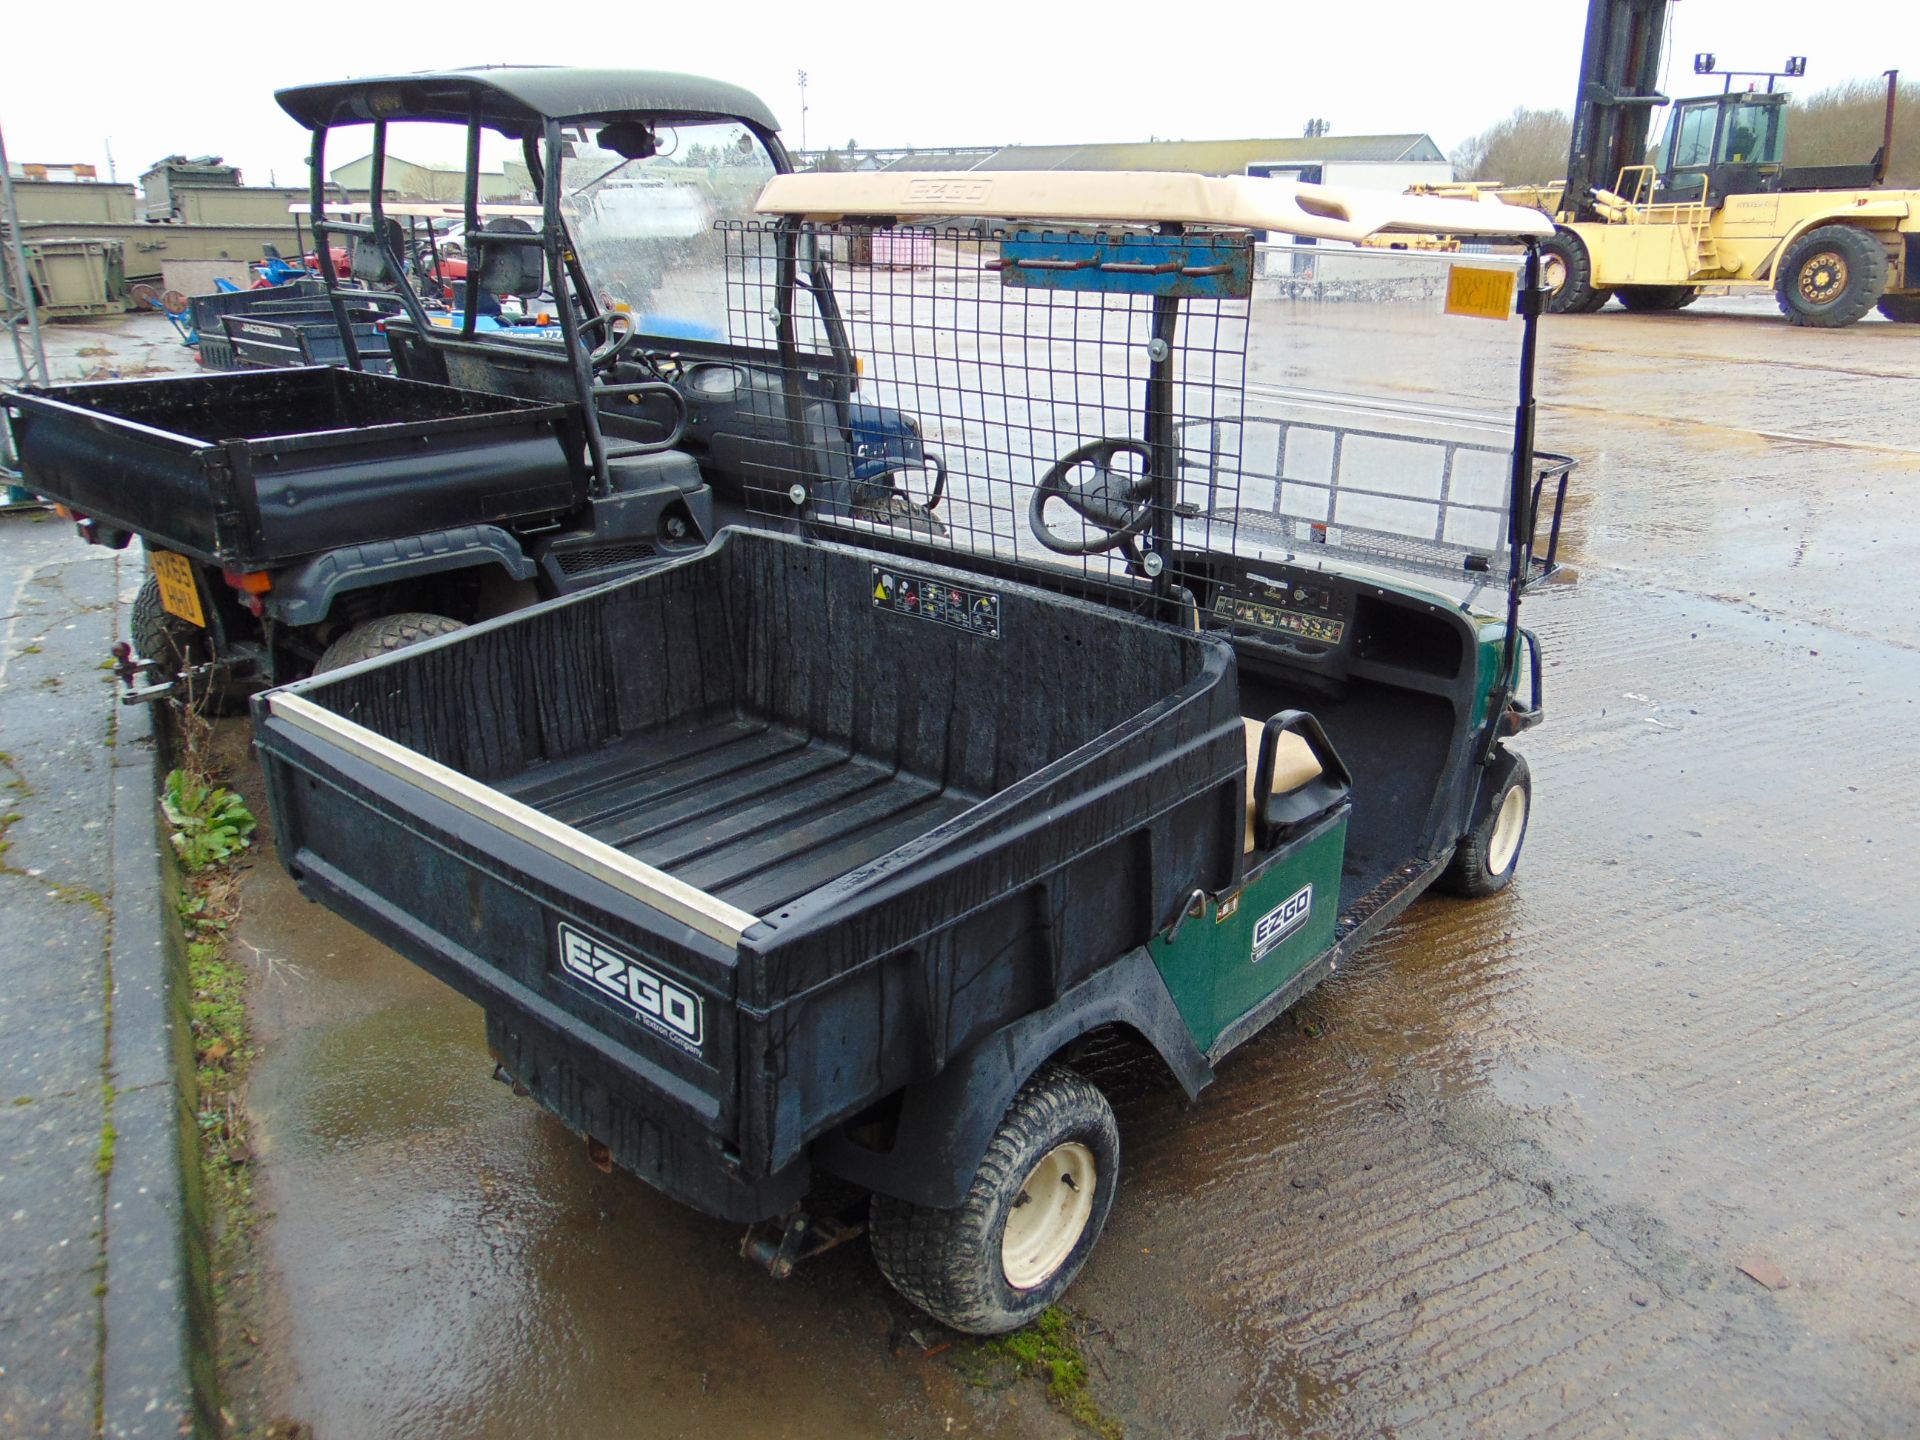 EZ-GO MPT Turf Master Electric Grounds Cart - Image 6 of 11